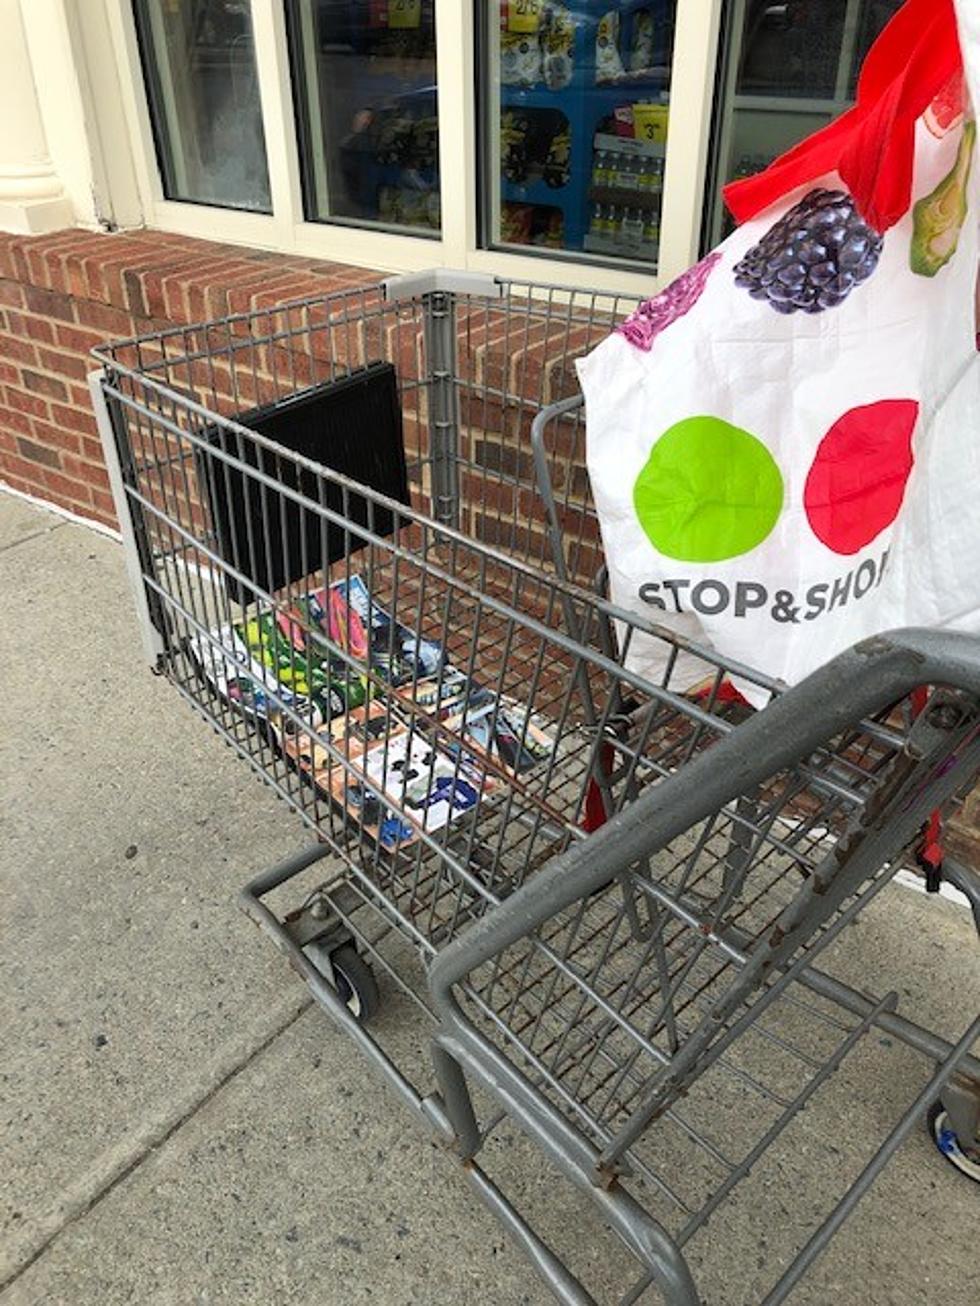 Why Do Some Hudson Valley Grocery Stores Charge for Shopping Carts?